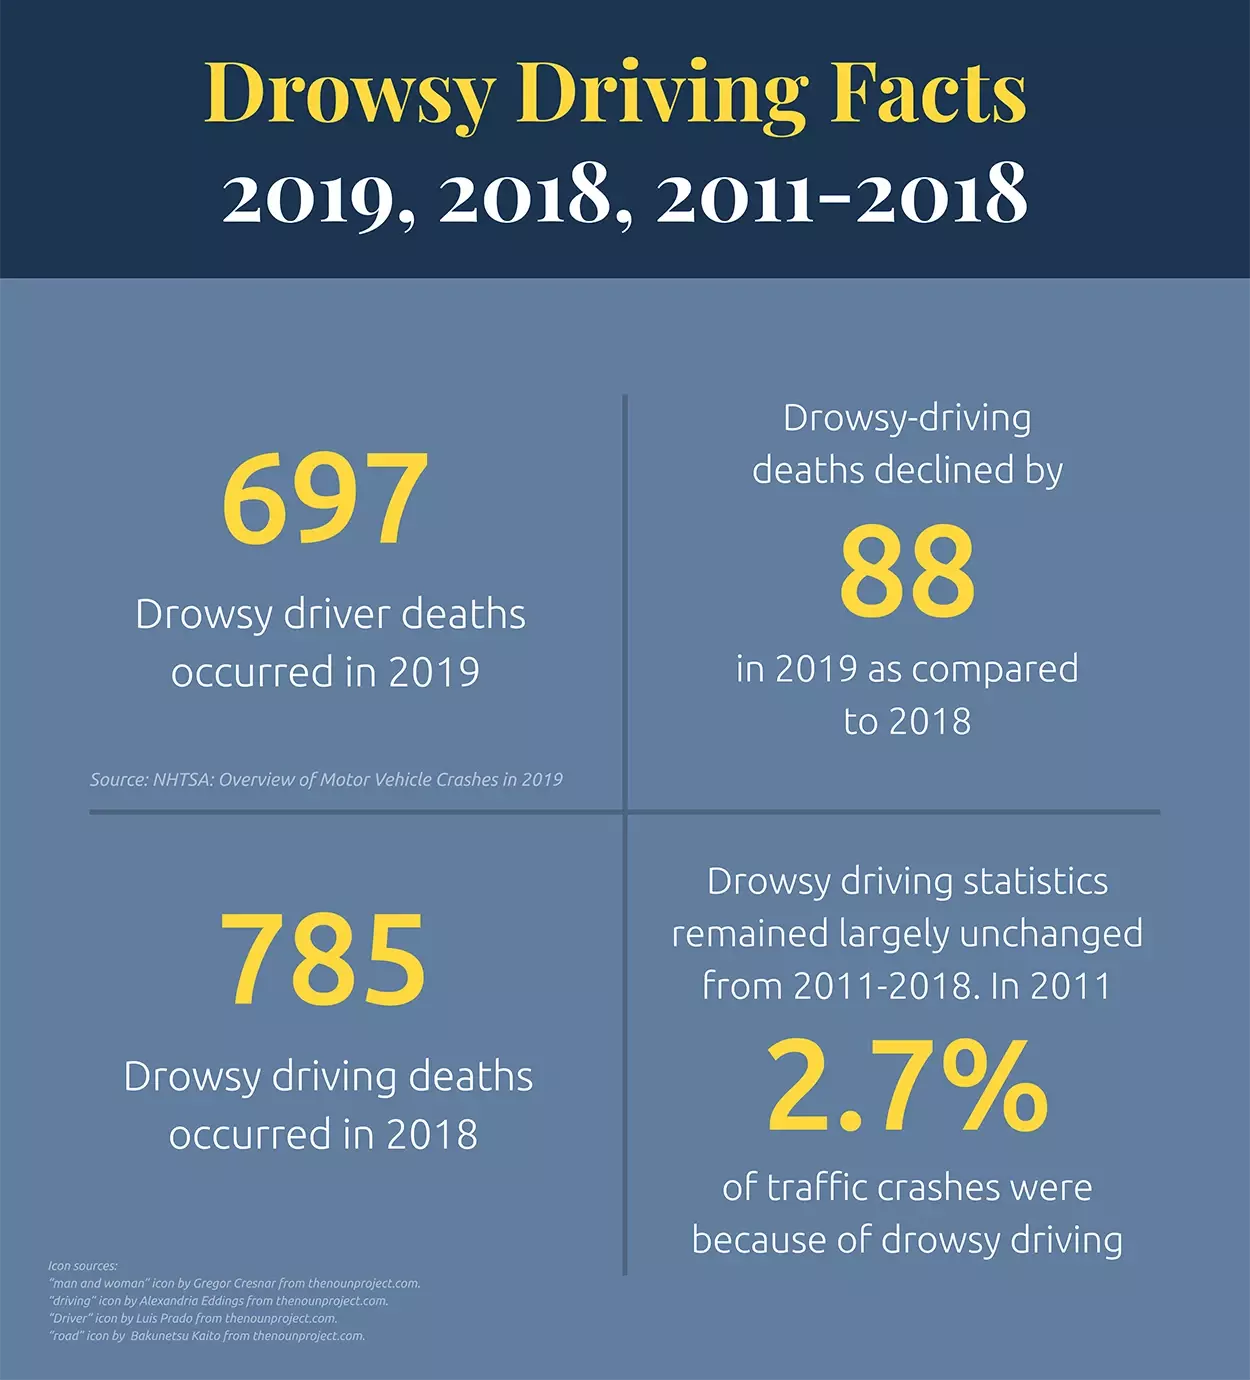 Drowsy driving facts